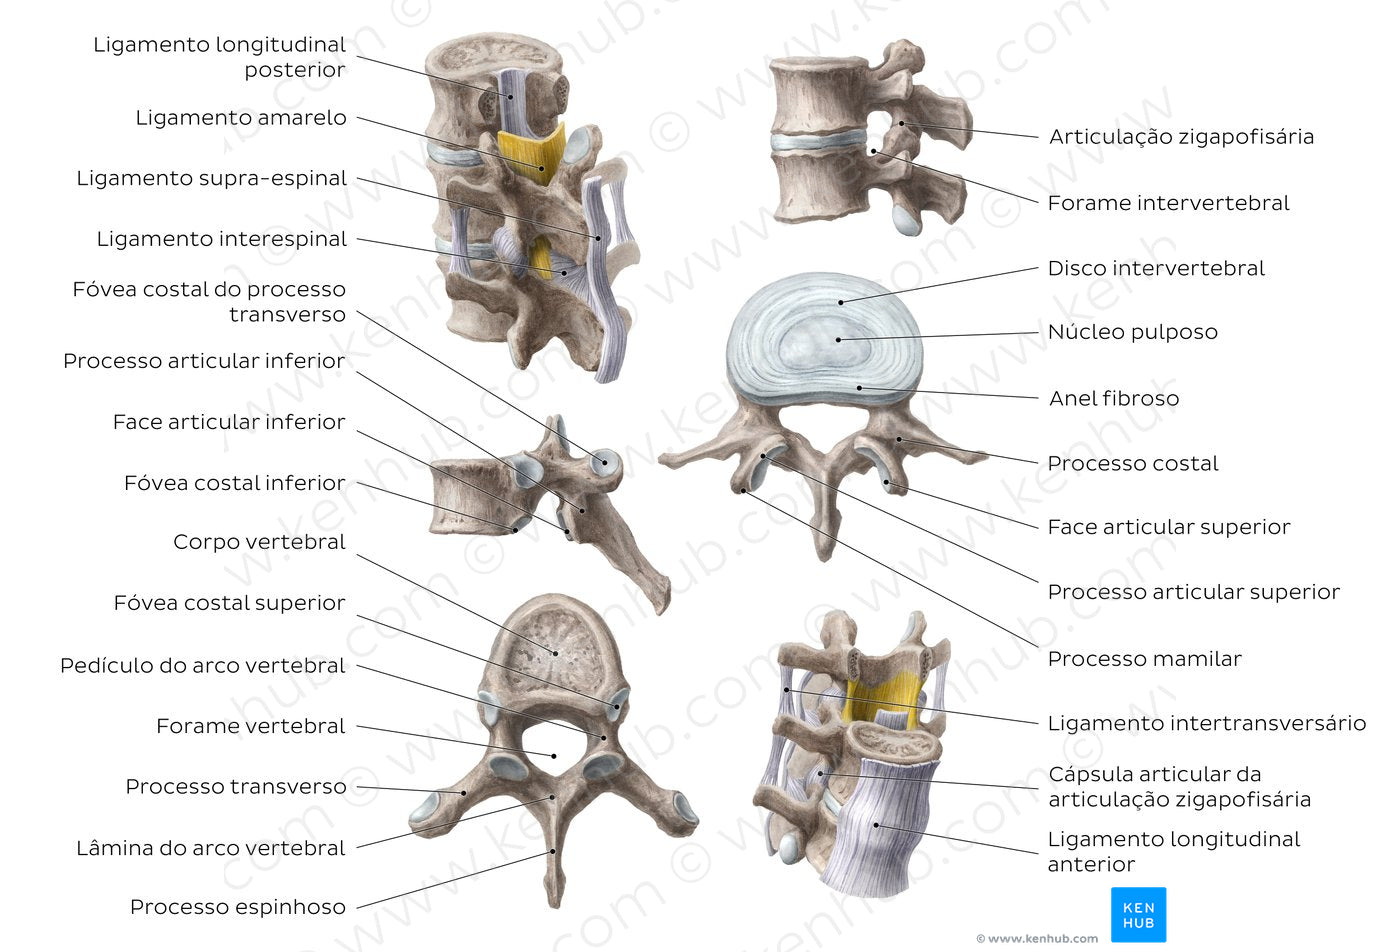 Thoracic and lumbar spines (Portuguese)